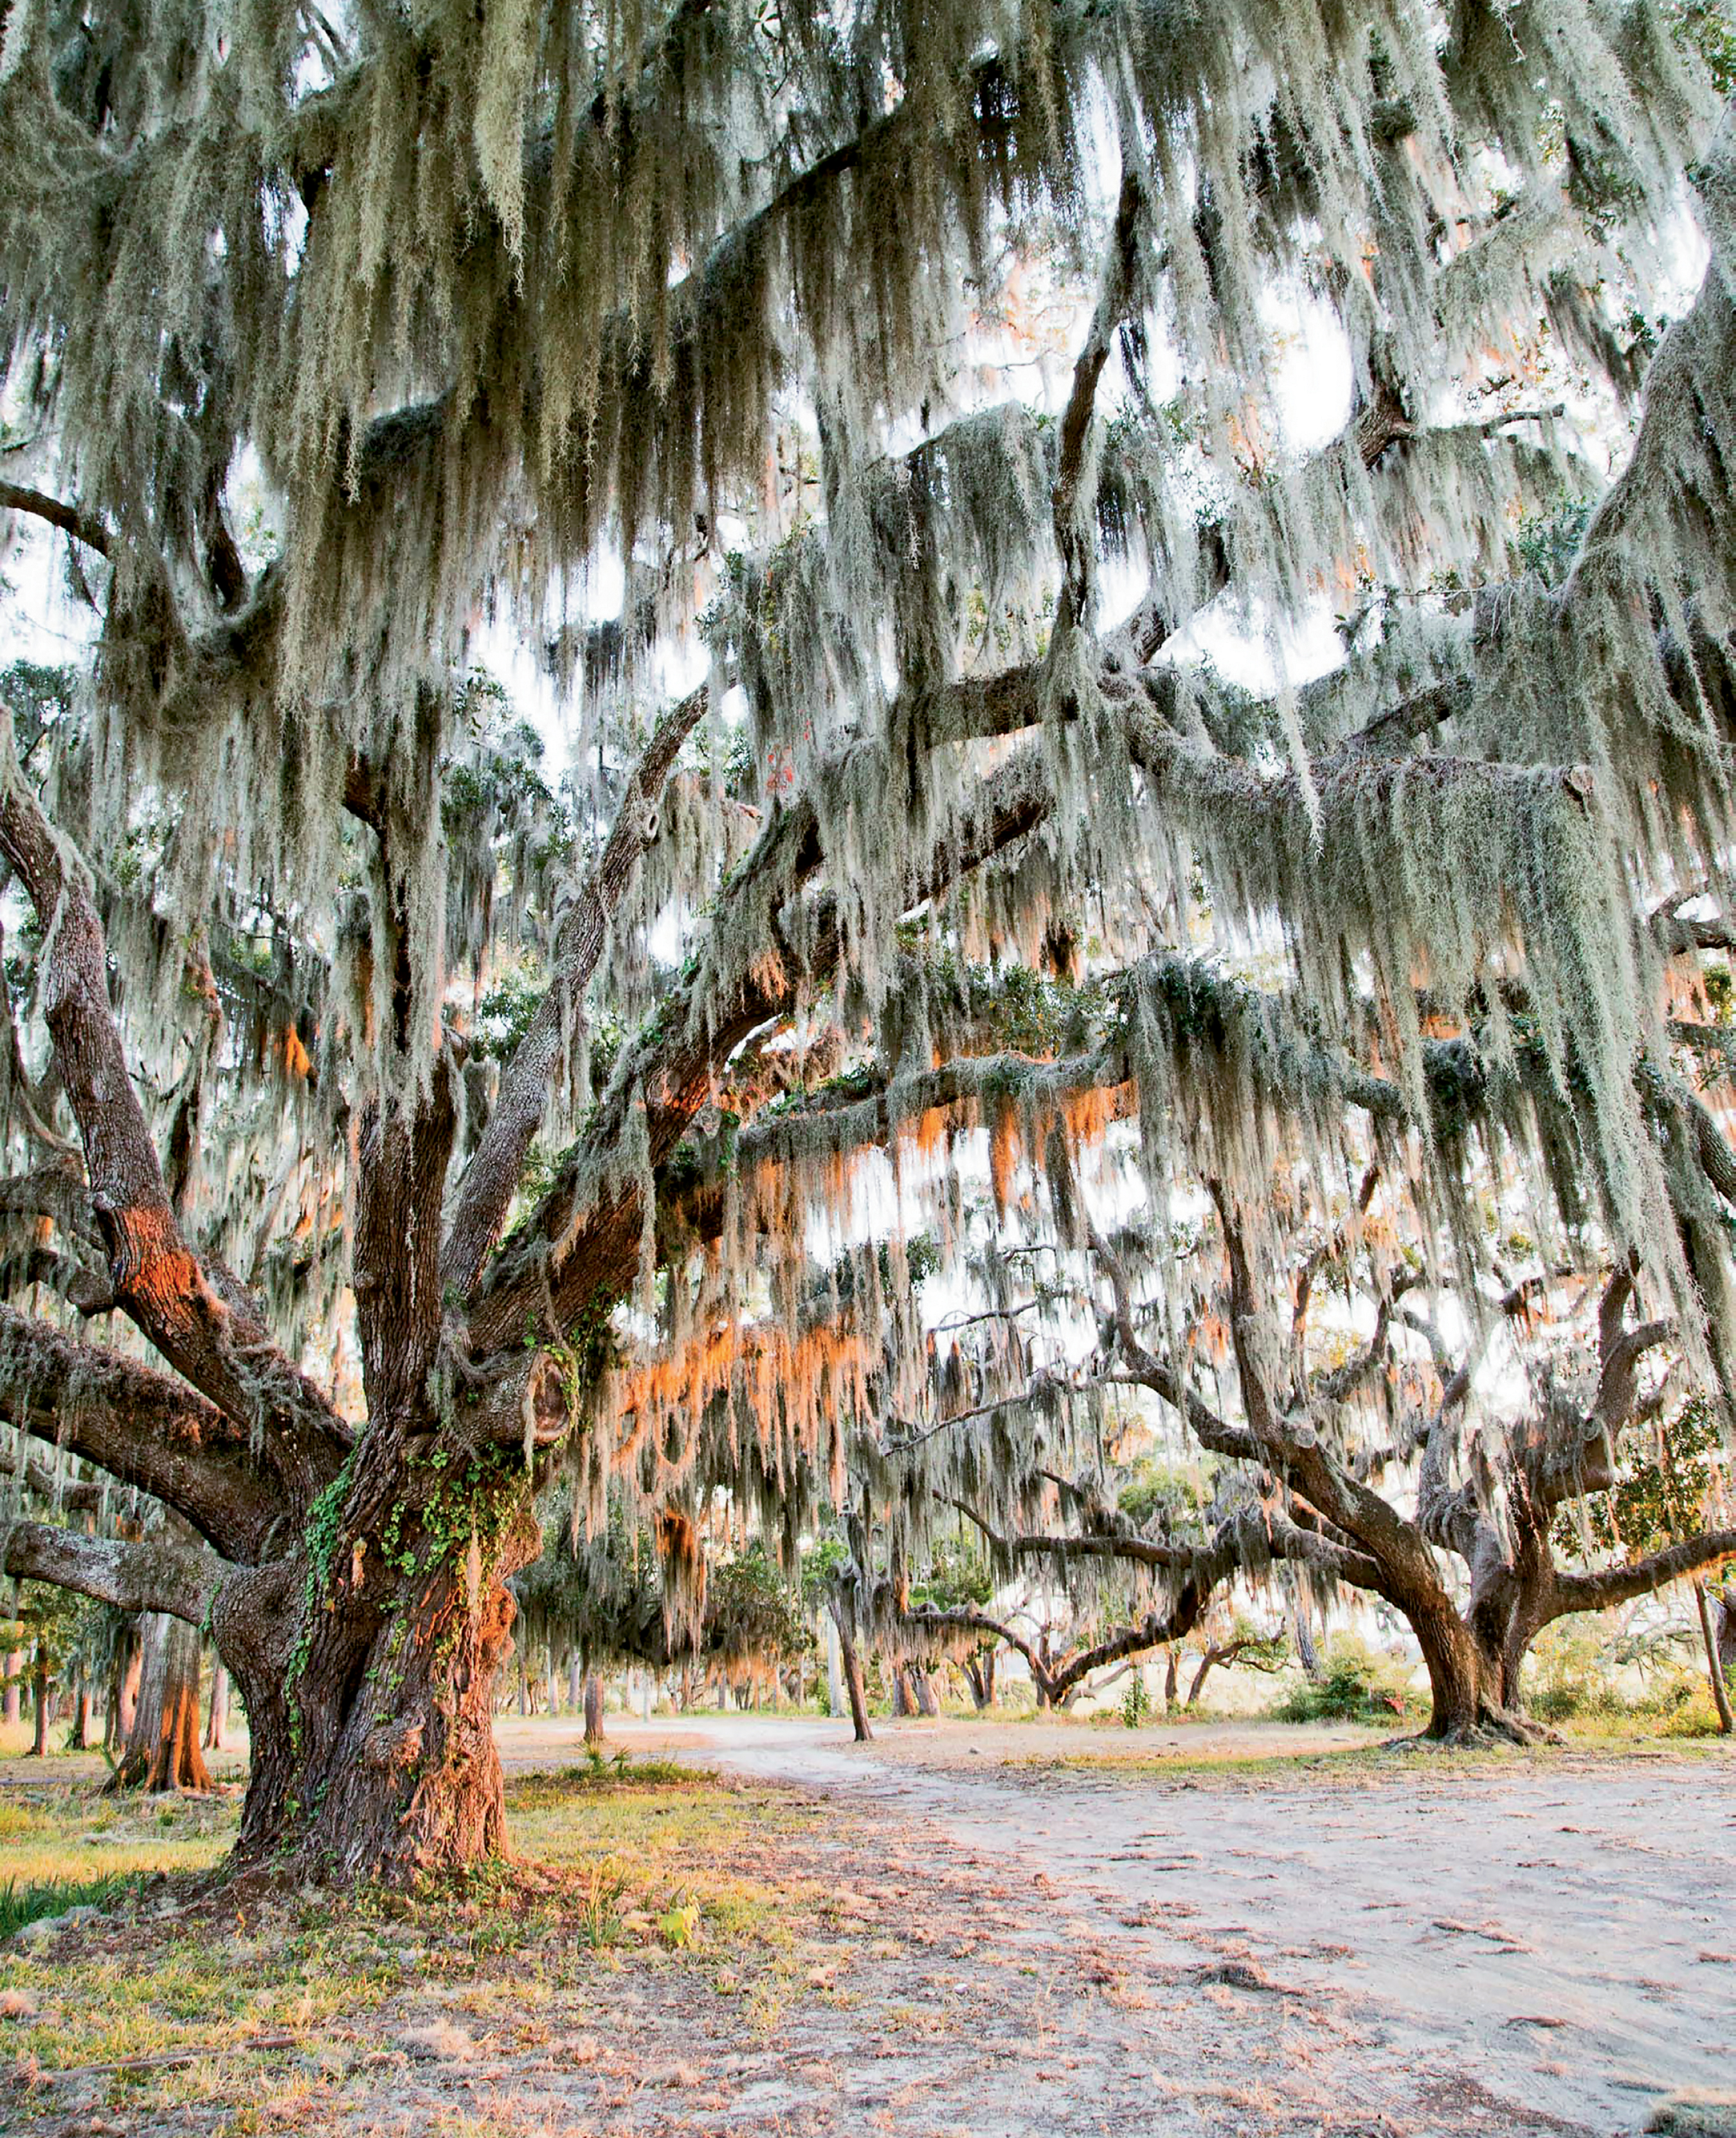 By the 1500s, Spain and France were staking claims along the Port Royal Sound, including the Spanish settlement of Santa Elena on present-day Parris Island. High bluffs and live oak trees are part of the scenery.